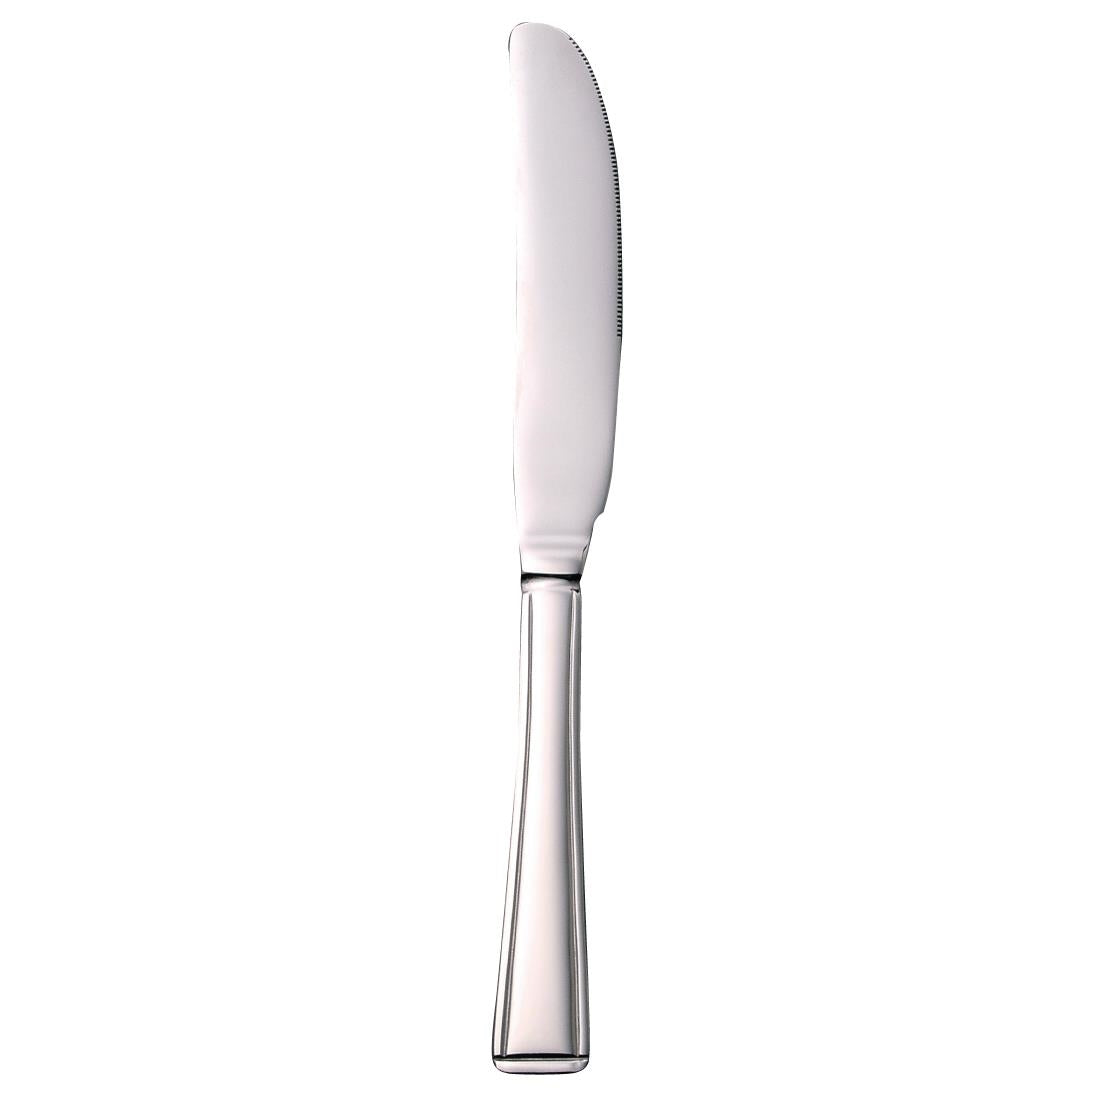 D690 Olympia Harley Table Knife (Pack of 12) JD Catering Equipment Solutions Ltd